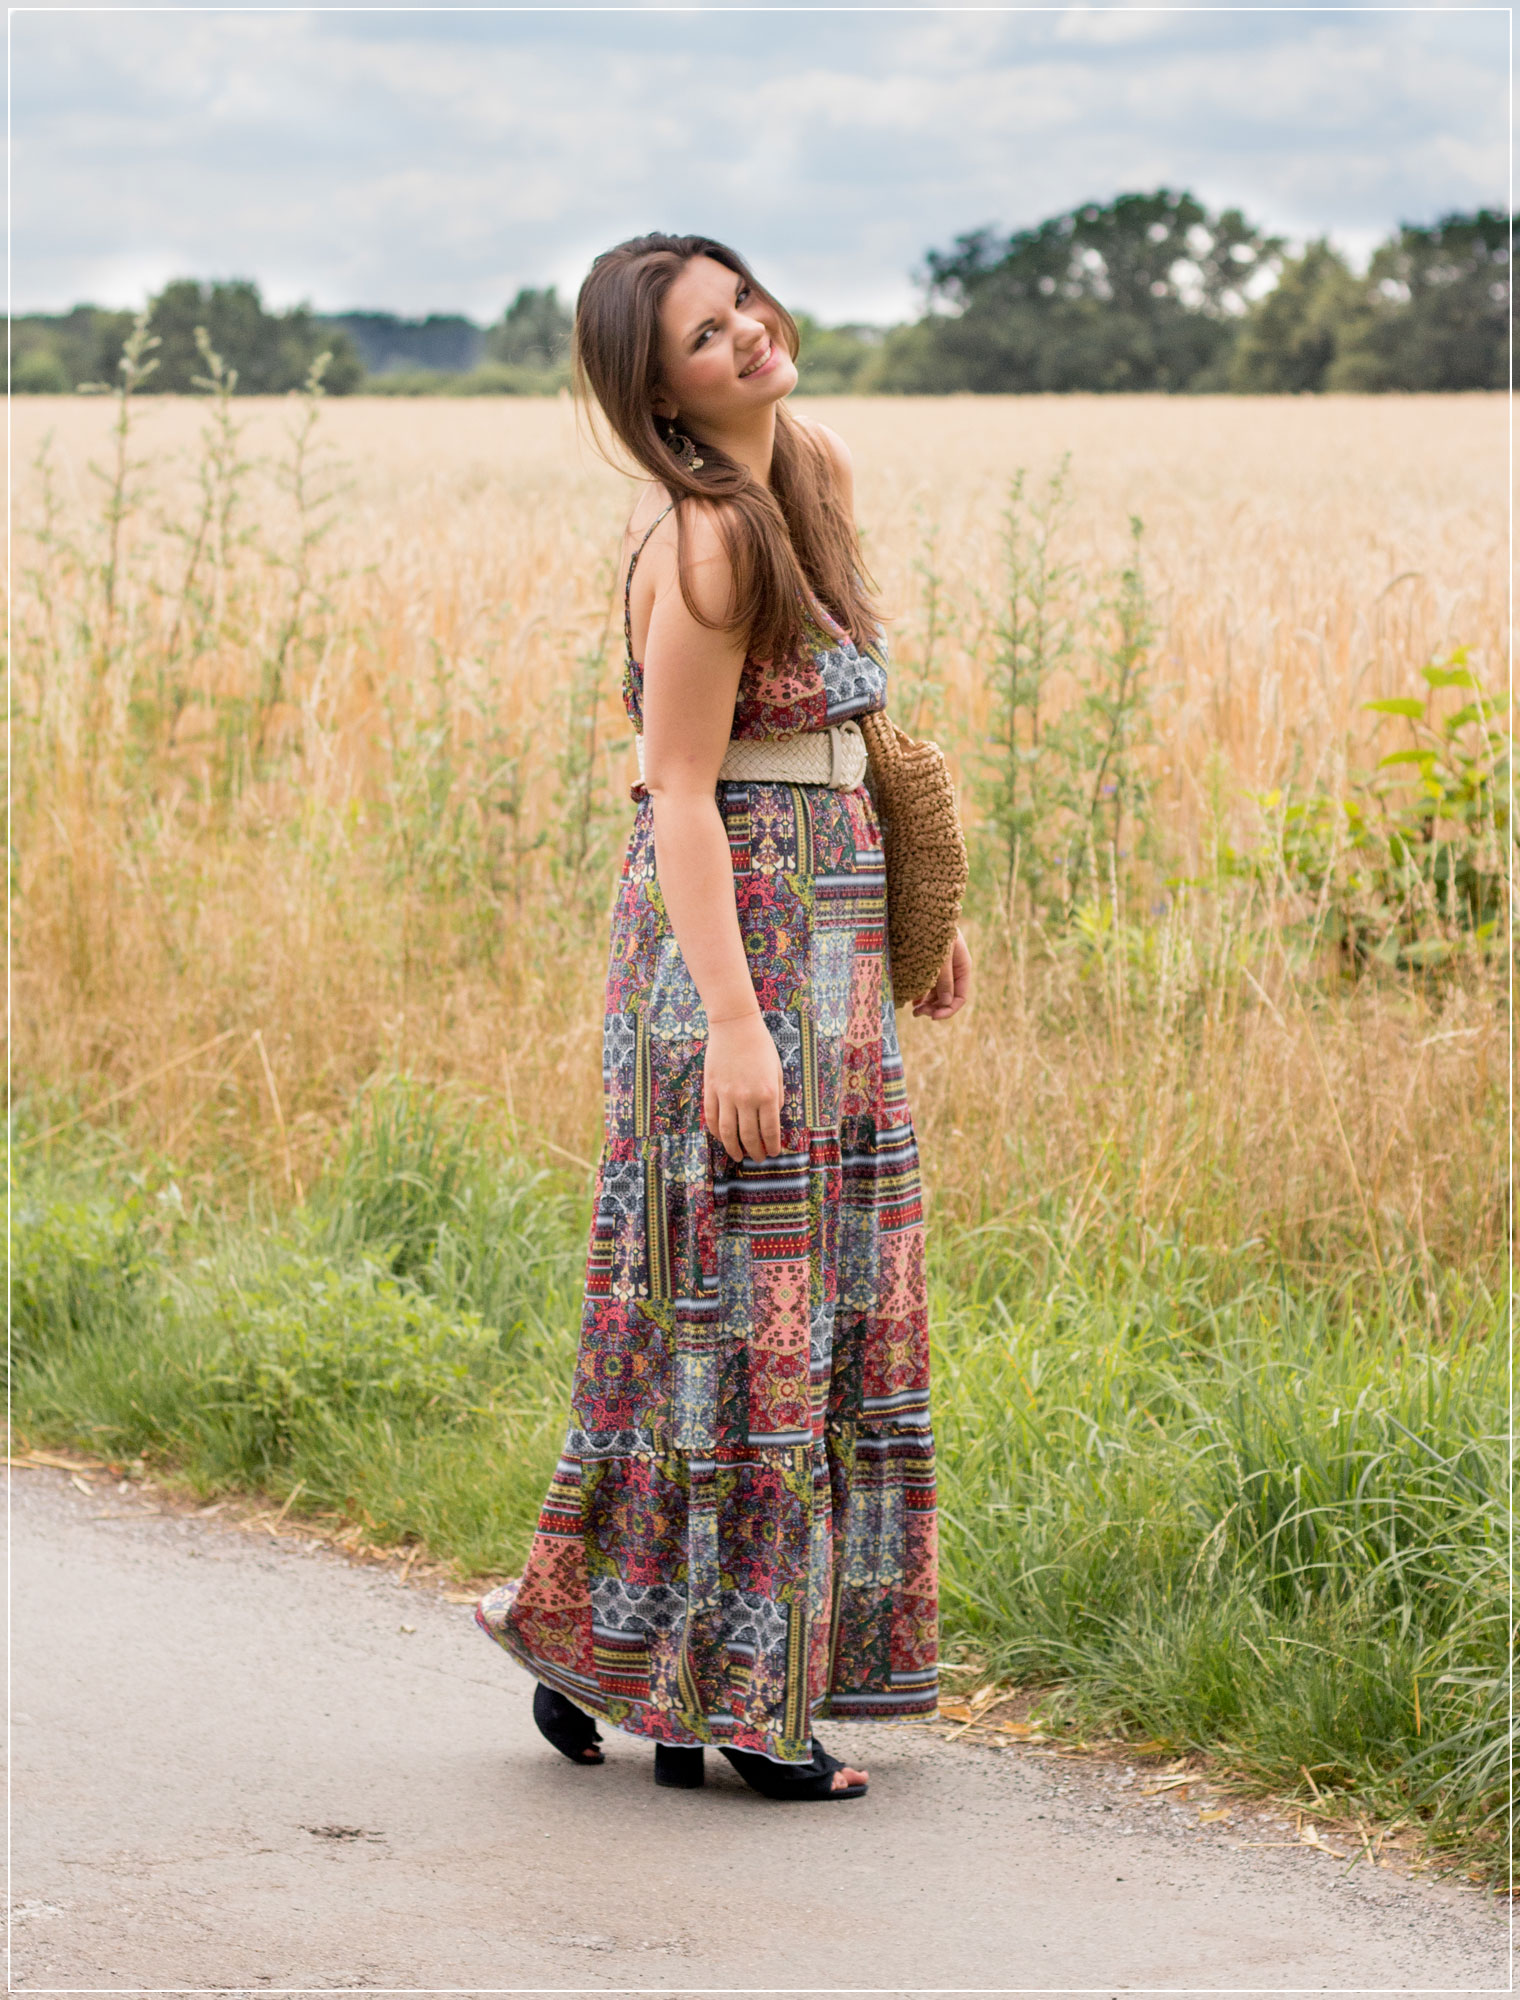 Boho-Style, Sommerlook, Maxikleid, Sommeroutfit, Boho-Look, Styleguide, Outfitinspiration, Modebloggerin, Fashionbloggerin, Modeblog, Ruhrgebiet